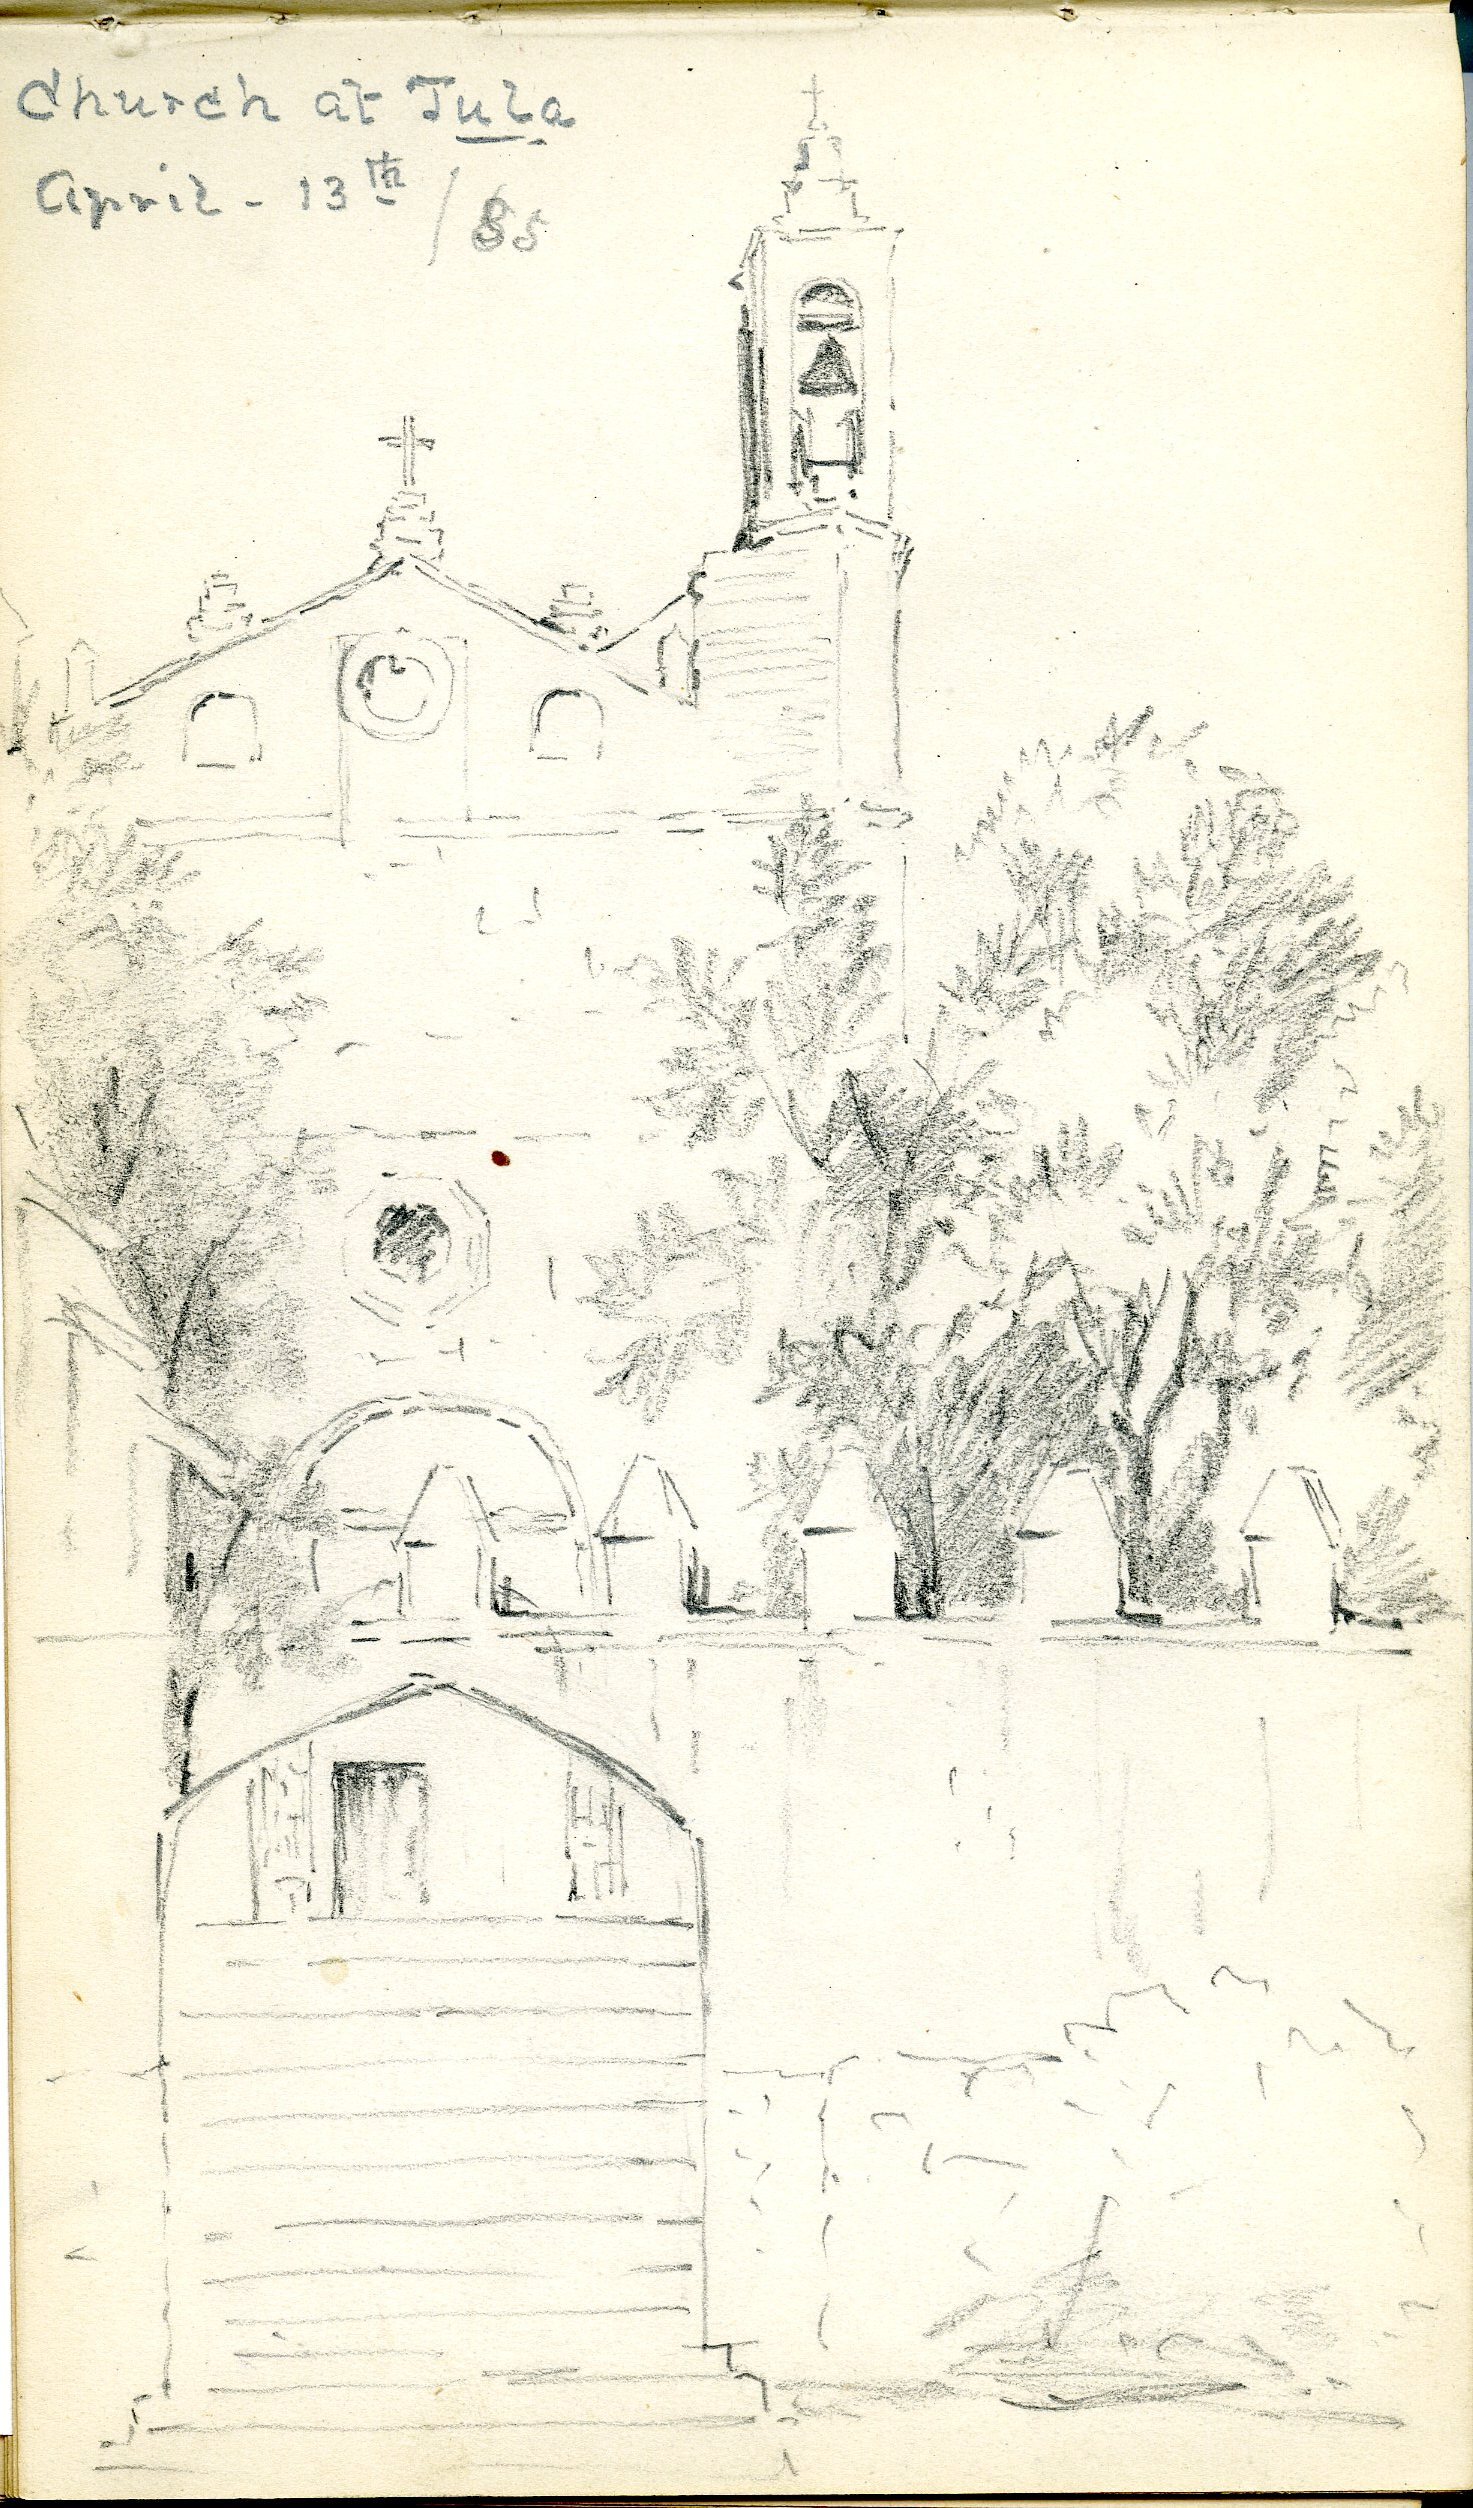 Sketch of church with bell tower behind walled enclosure.